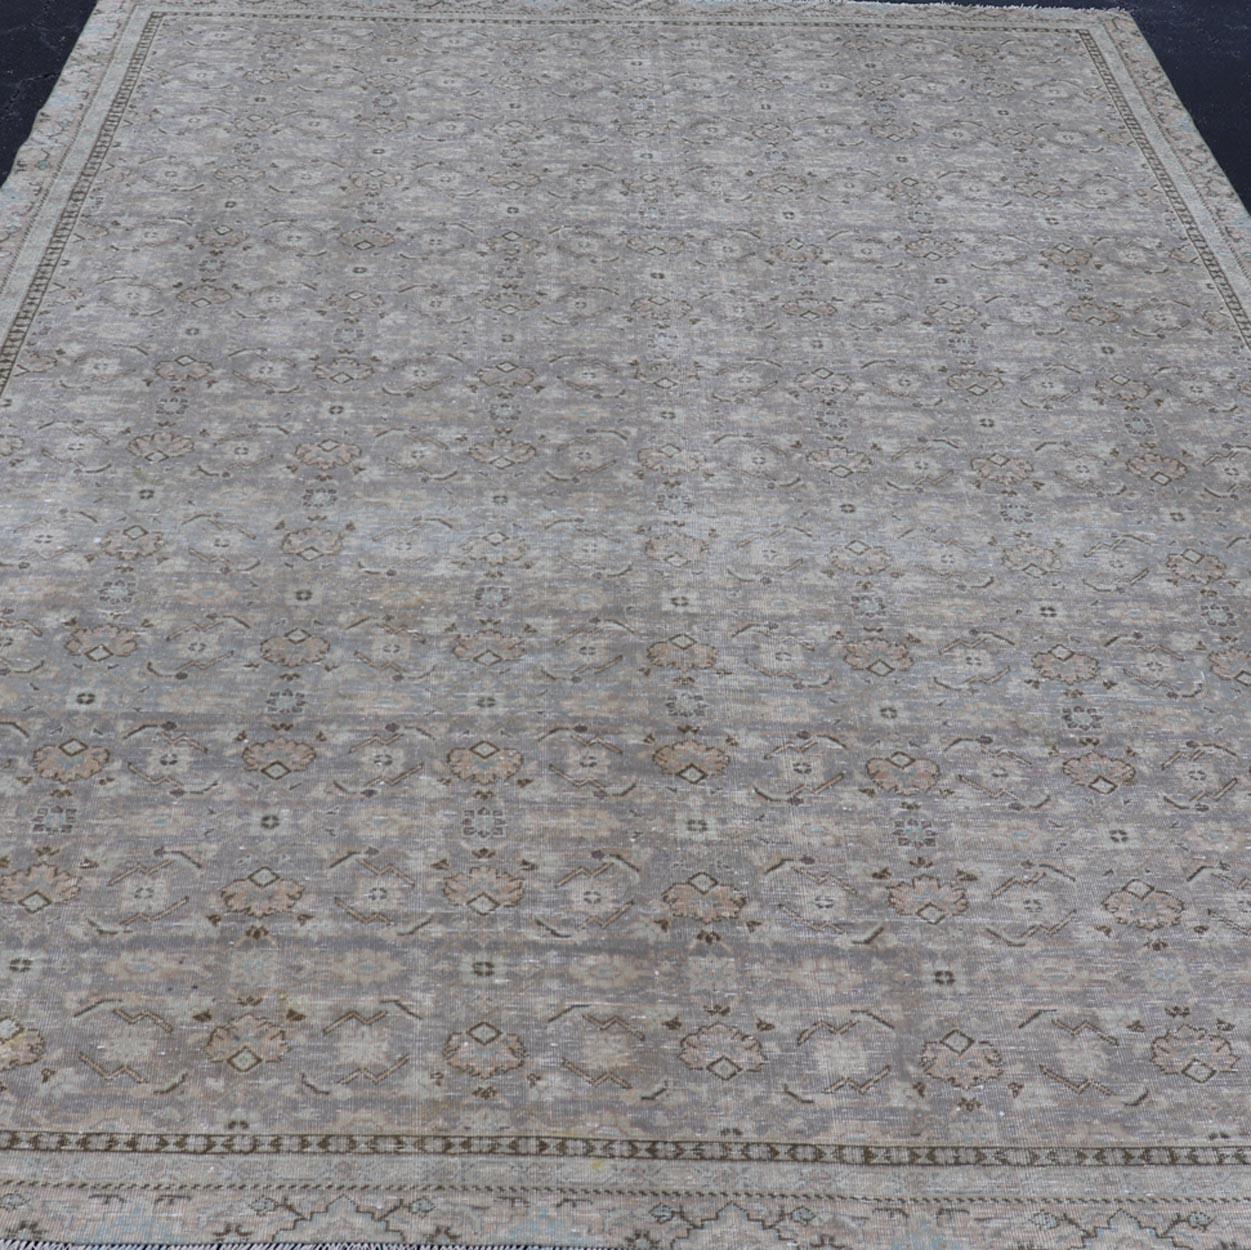 Antique Persian Tabriz Rug in All-Over Herati in Shades of Lavender and Tan  For Sale 3